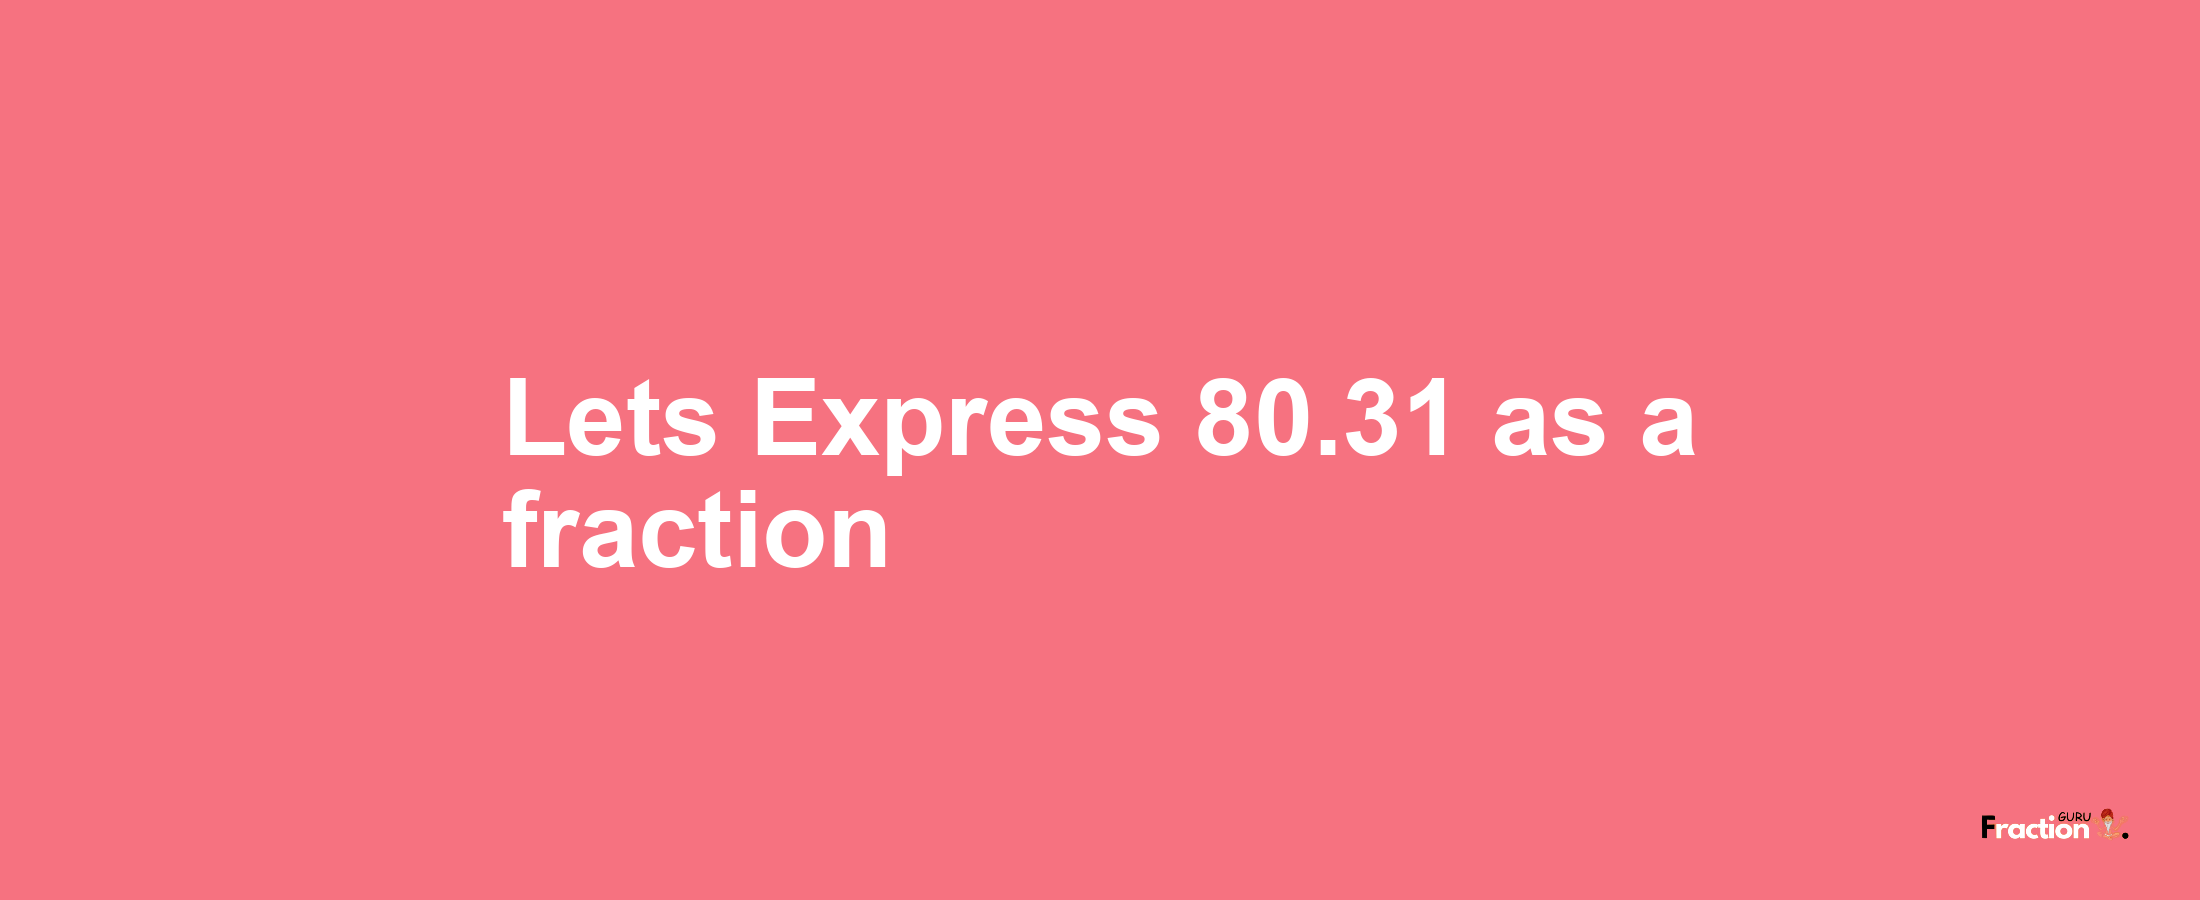 Lets Express 80.31 as afraction